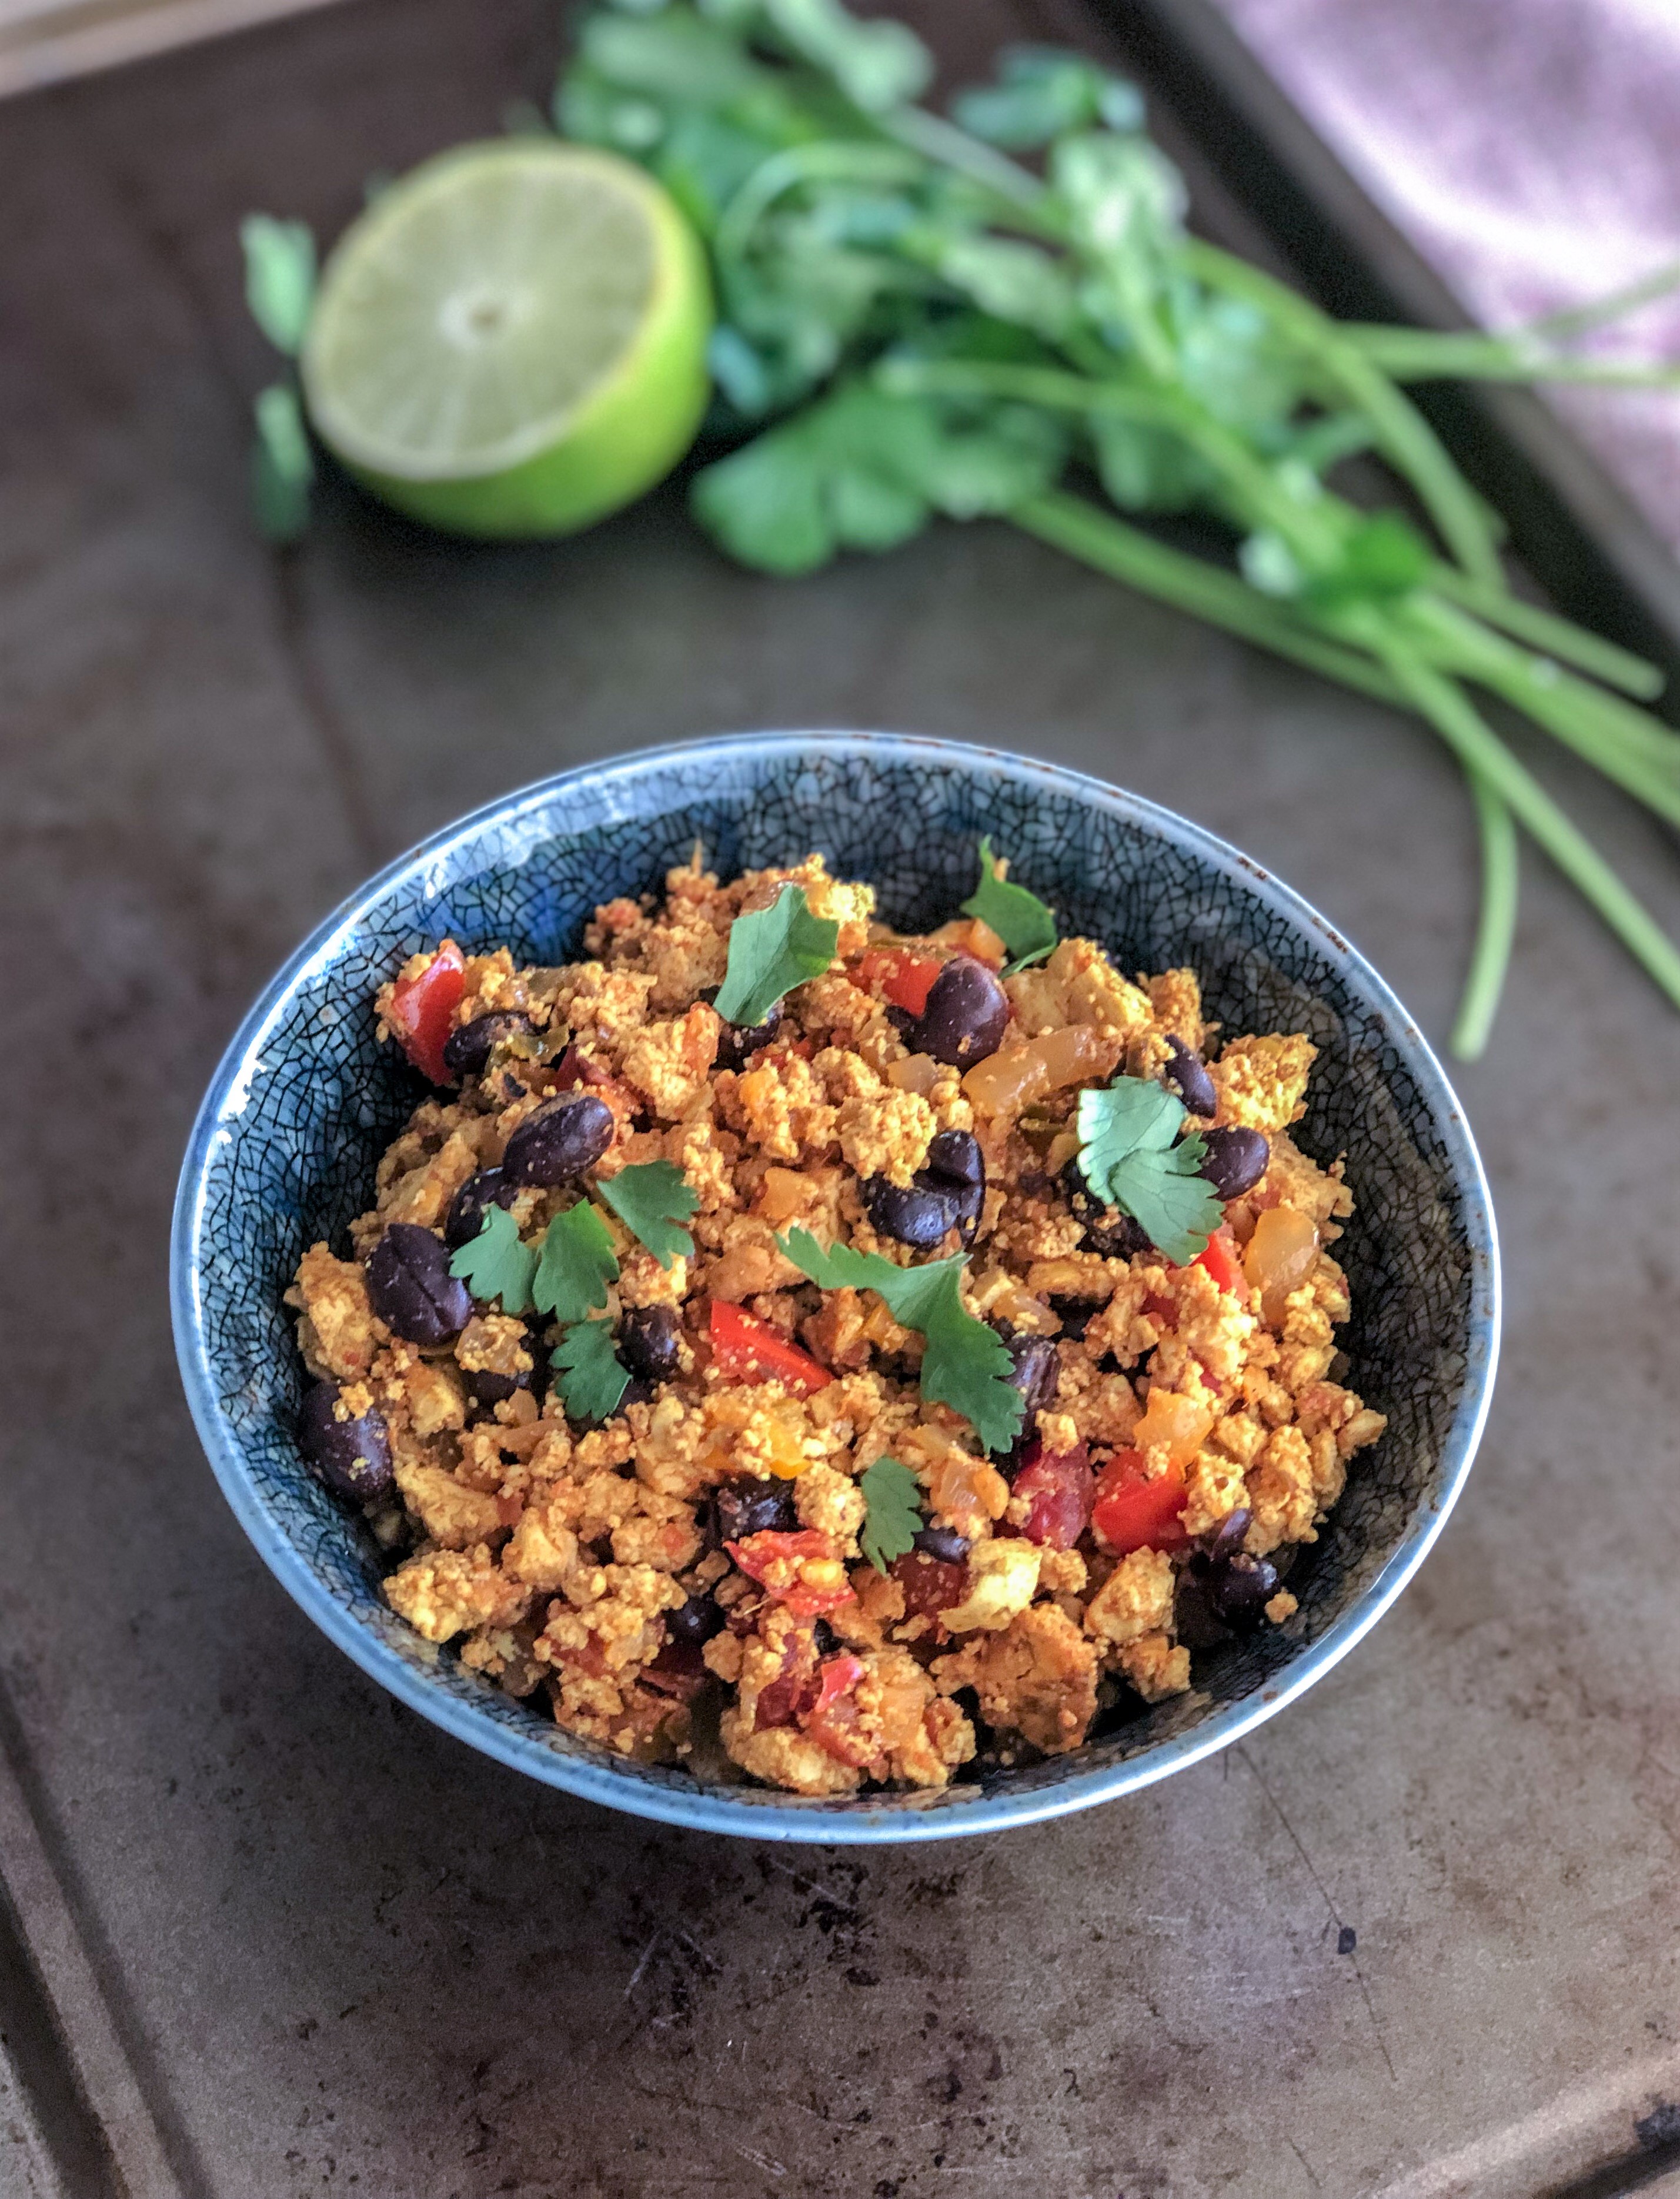 Vegan Southwestern Tofu scramble with bell peppers, salsa and black beans